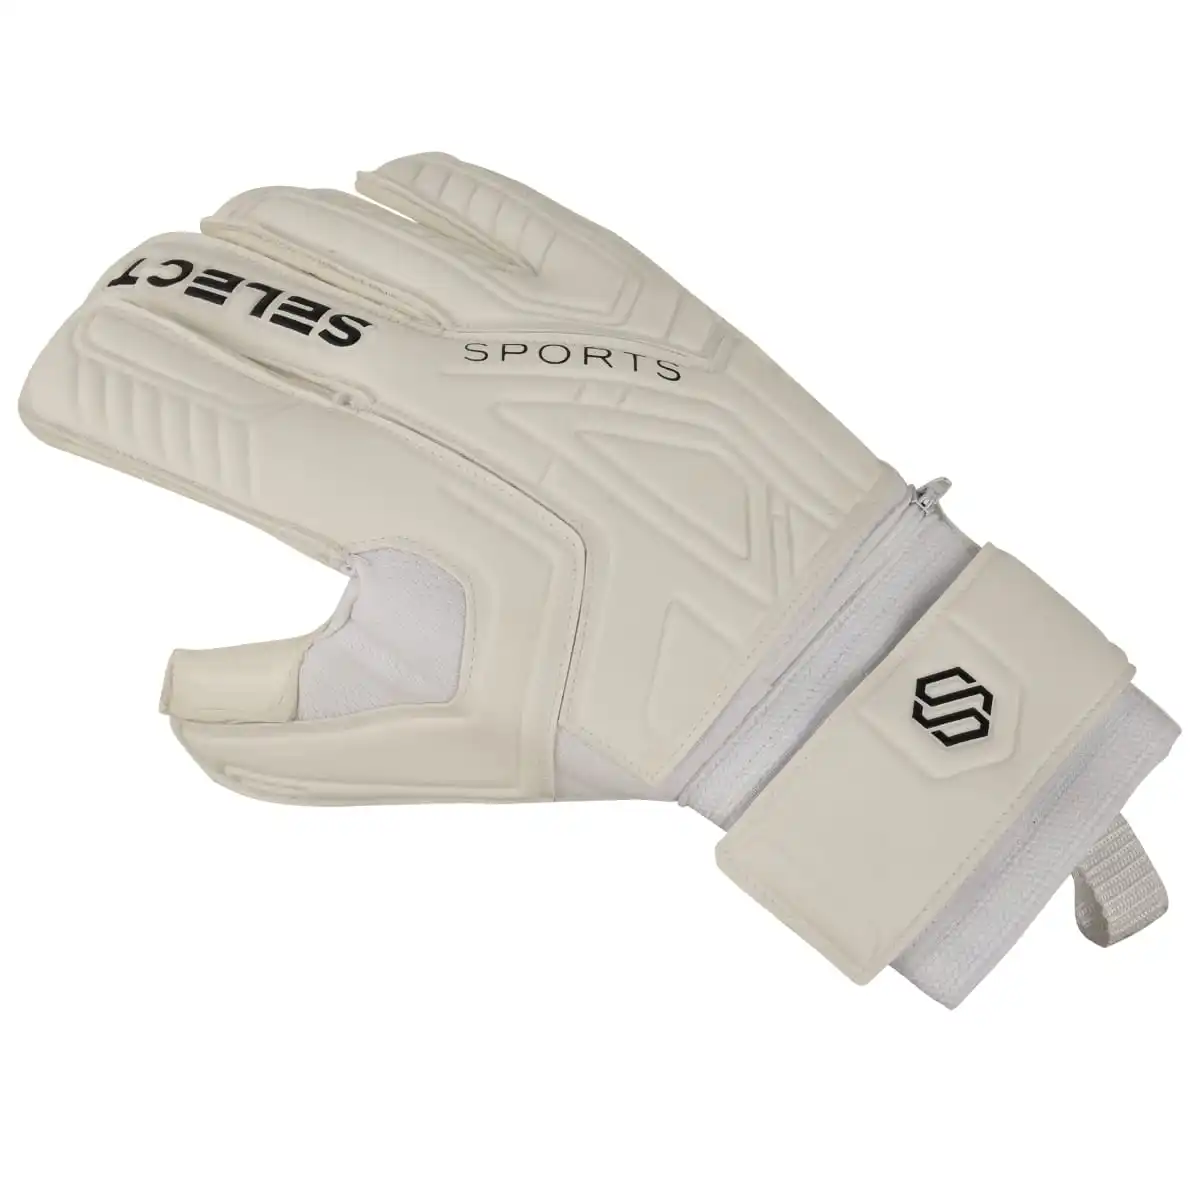 TOP QUALITY PROFESSIONAL GOALIE GLOVES GERMAN LATEX 4MM CUSTOMIZED GOALKEEPER GLOVES FINGER PROTECTION